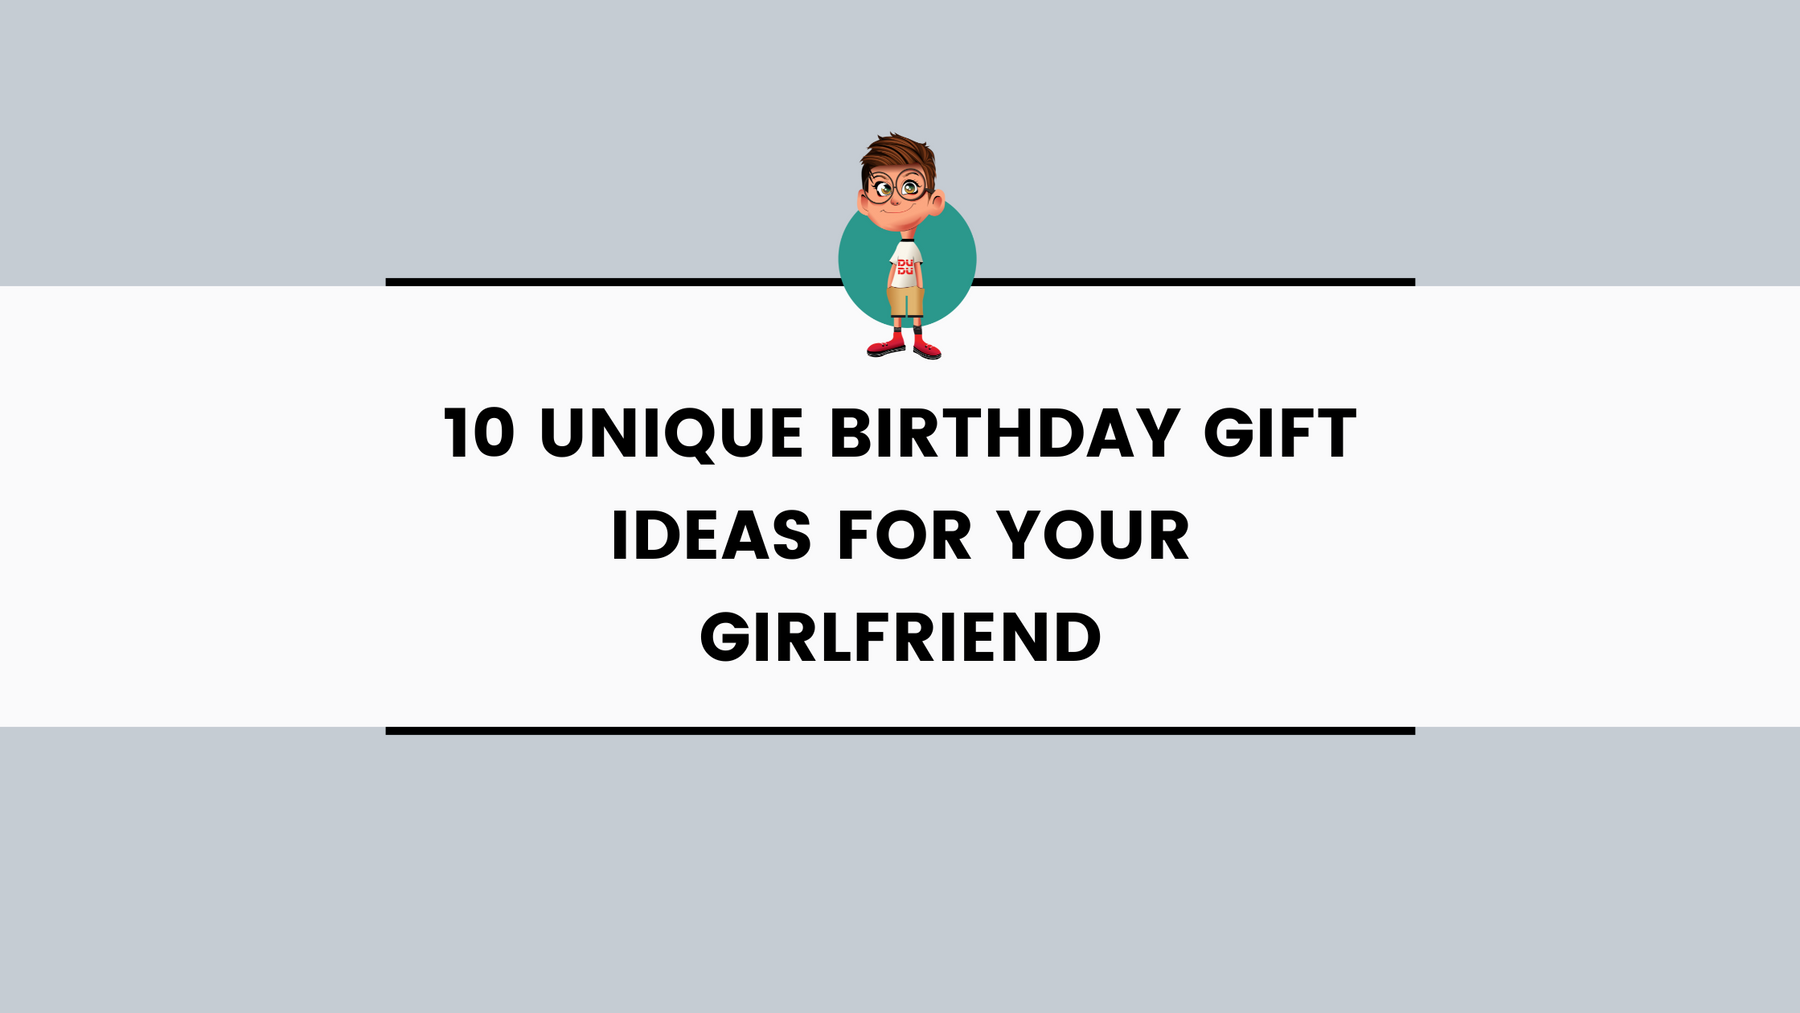 10 Unique Birthday Gift Ideas for Your Girlfriend